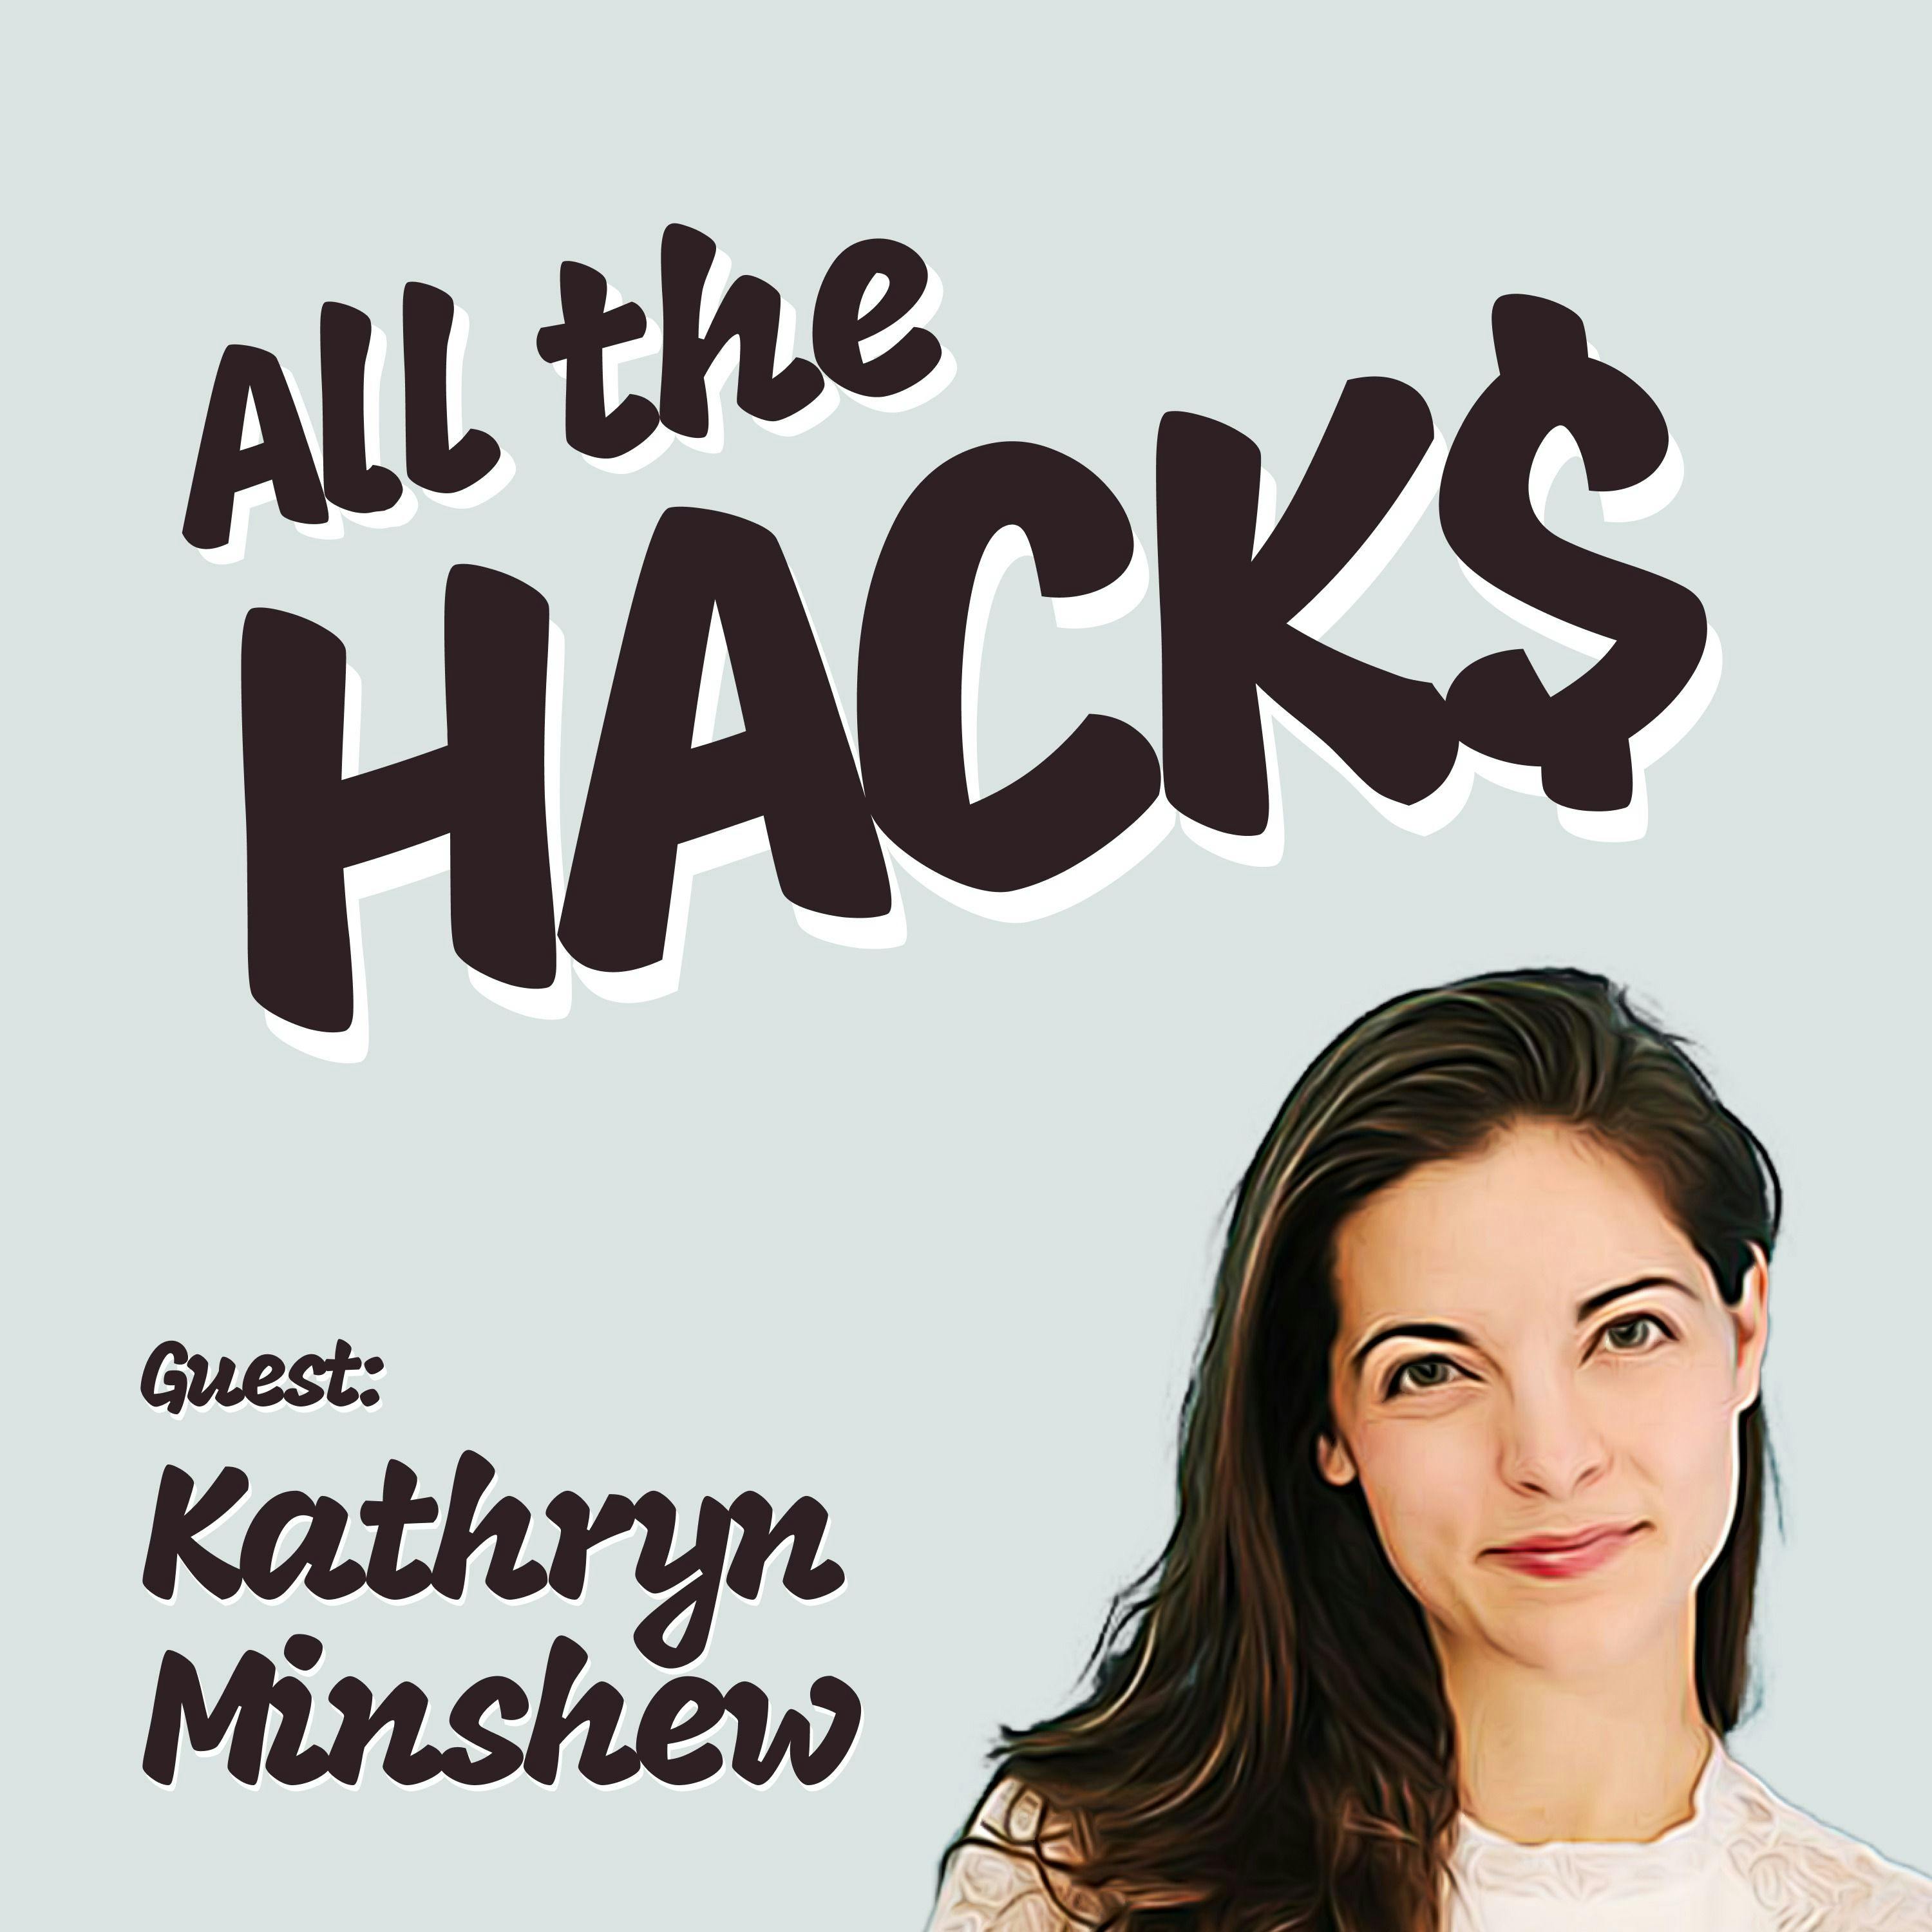 Career Hacks to Land a Job You'll Love With Kathryn Minshew